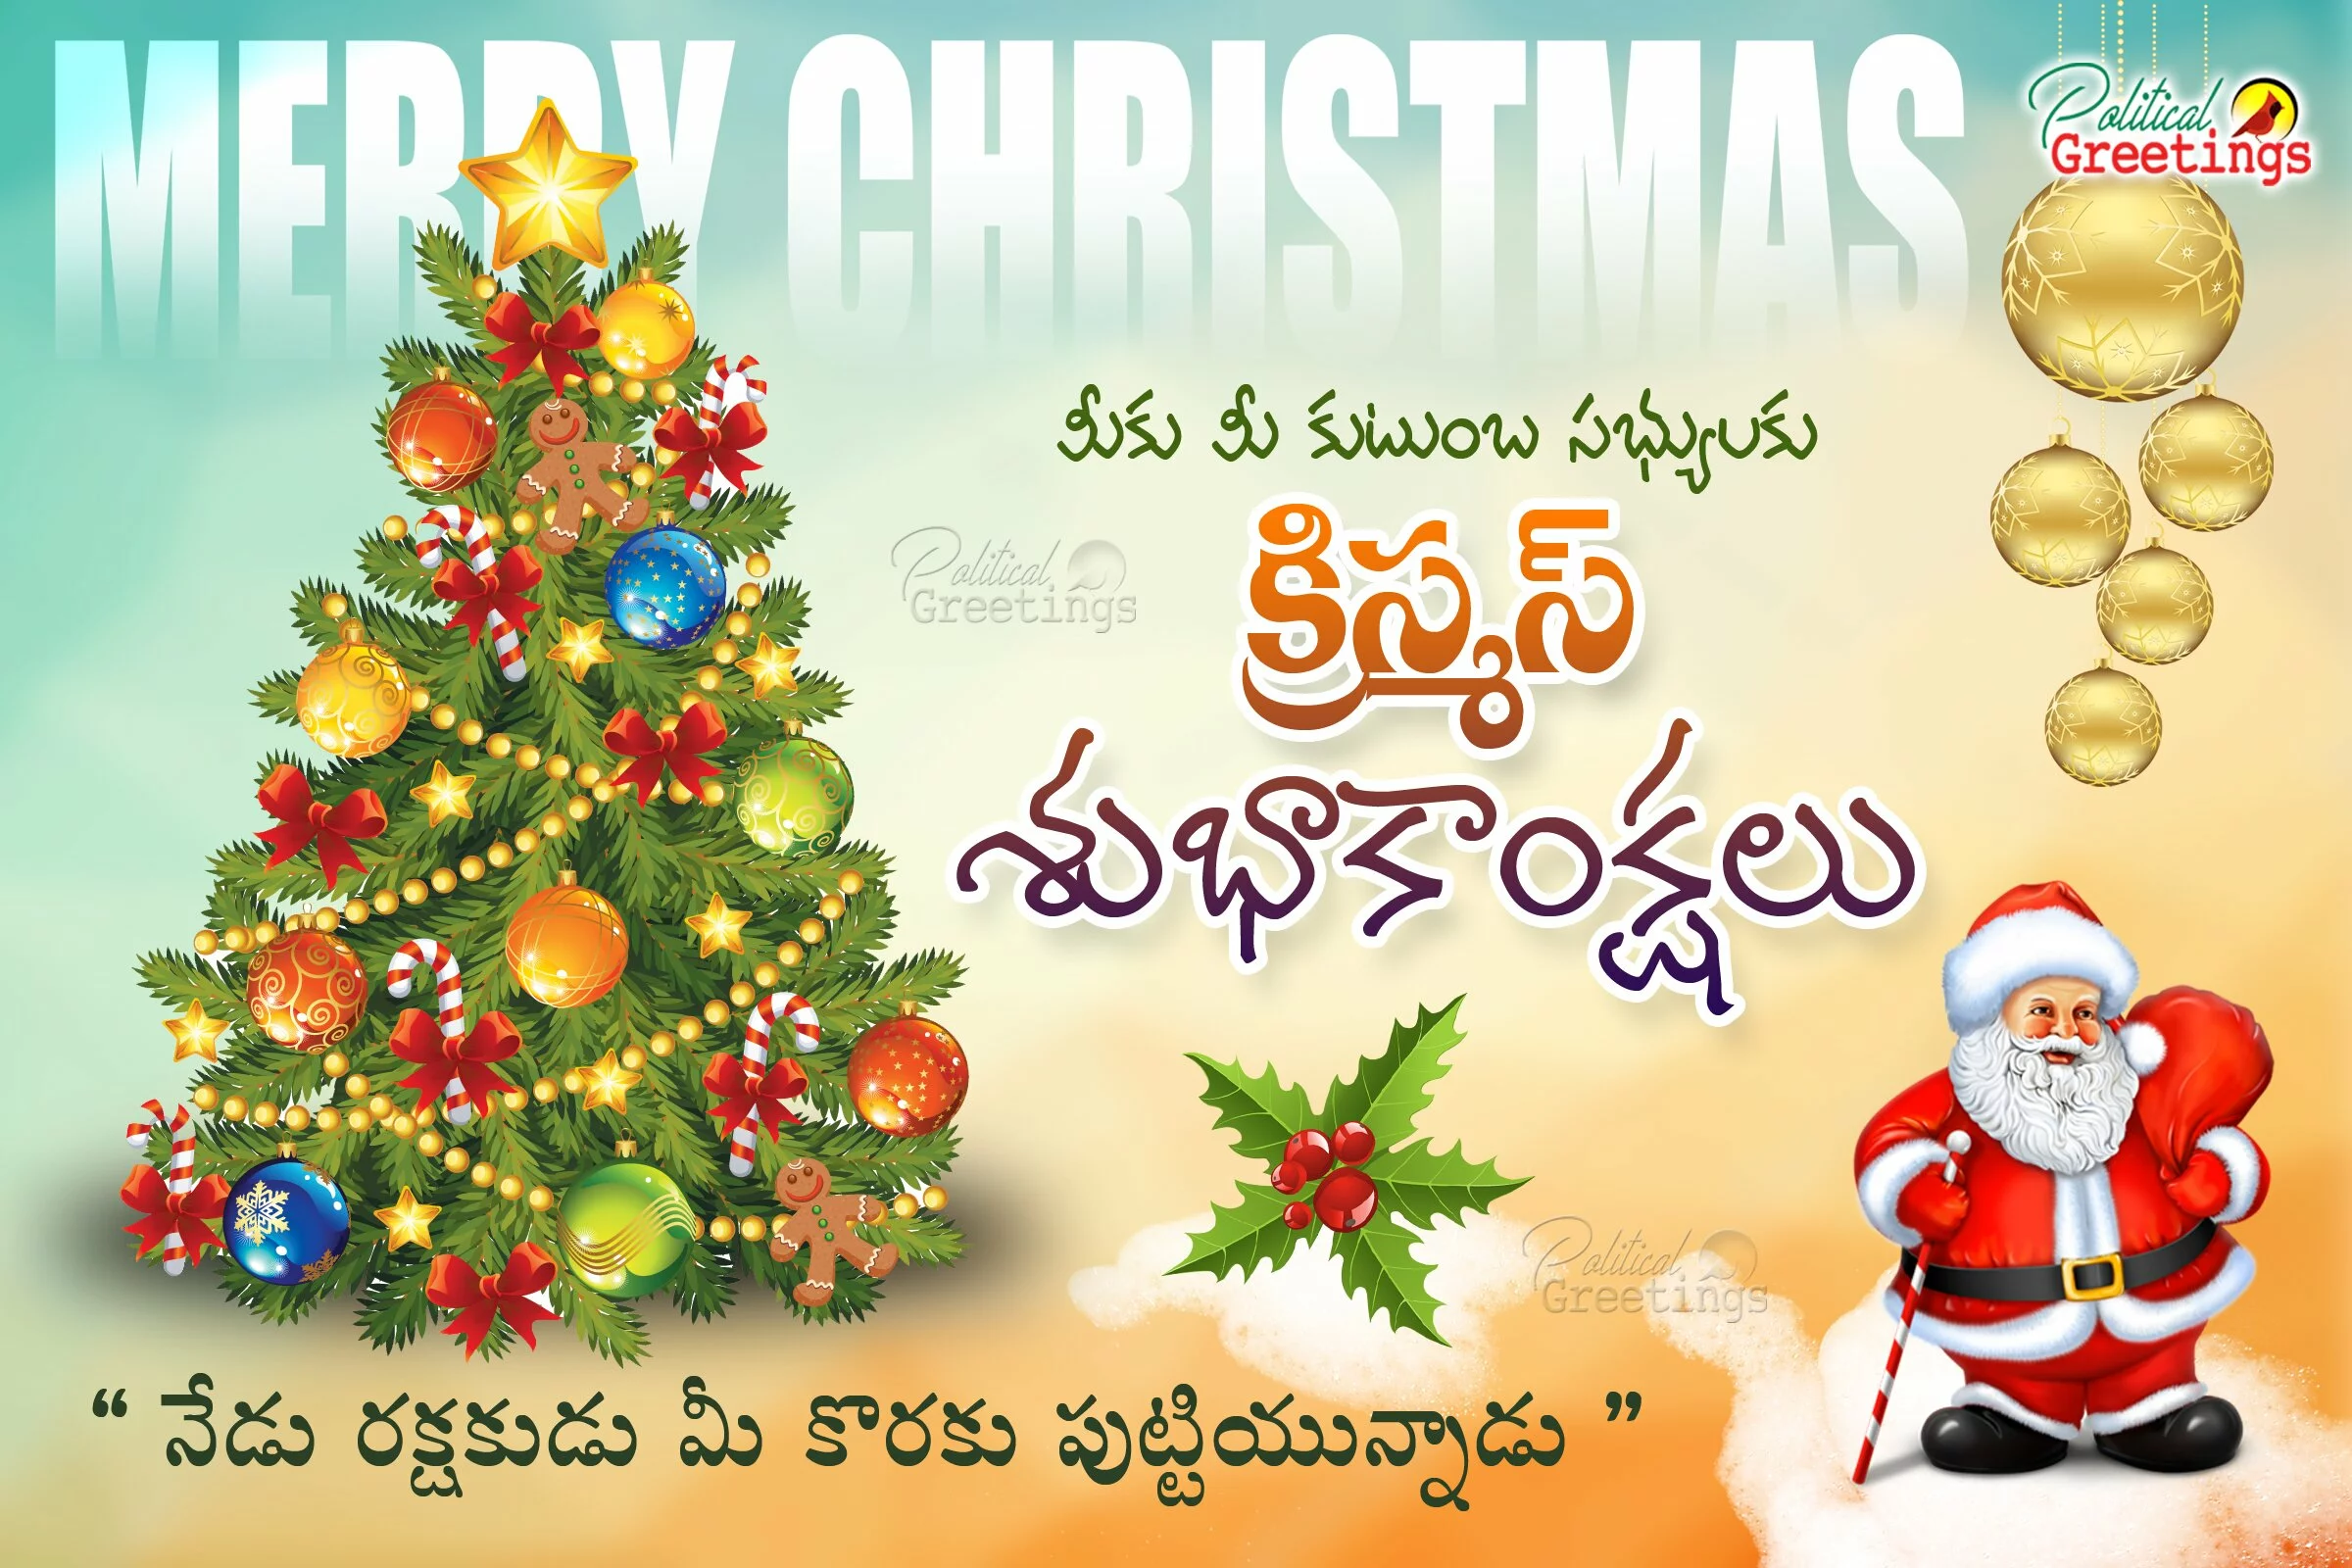 Telugu Merry Christmas Cards wishes greetings hd wallpapers